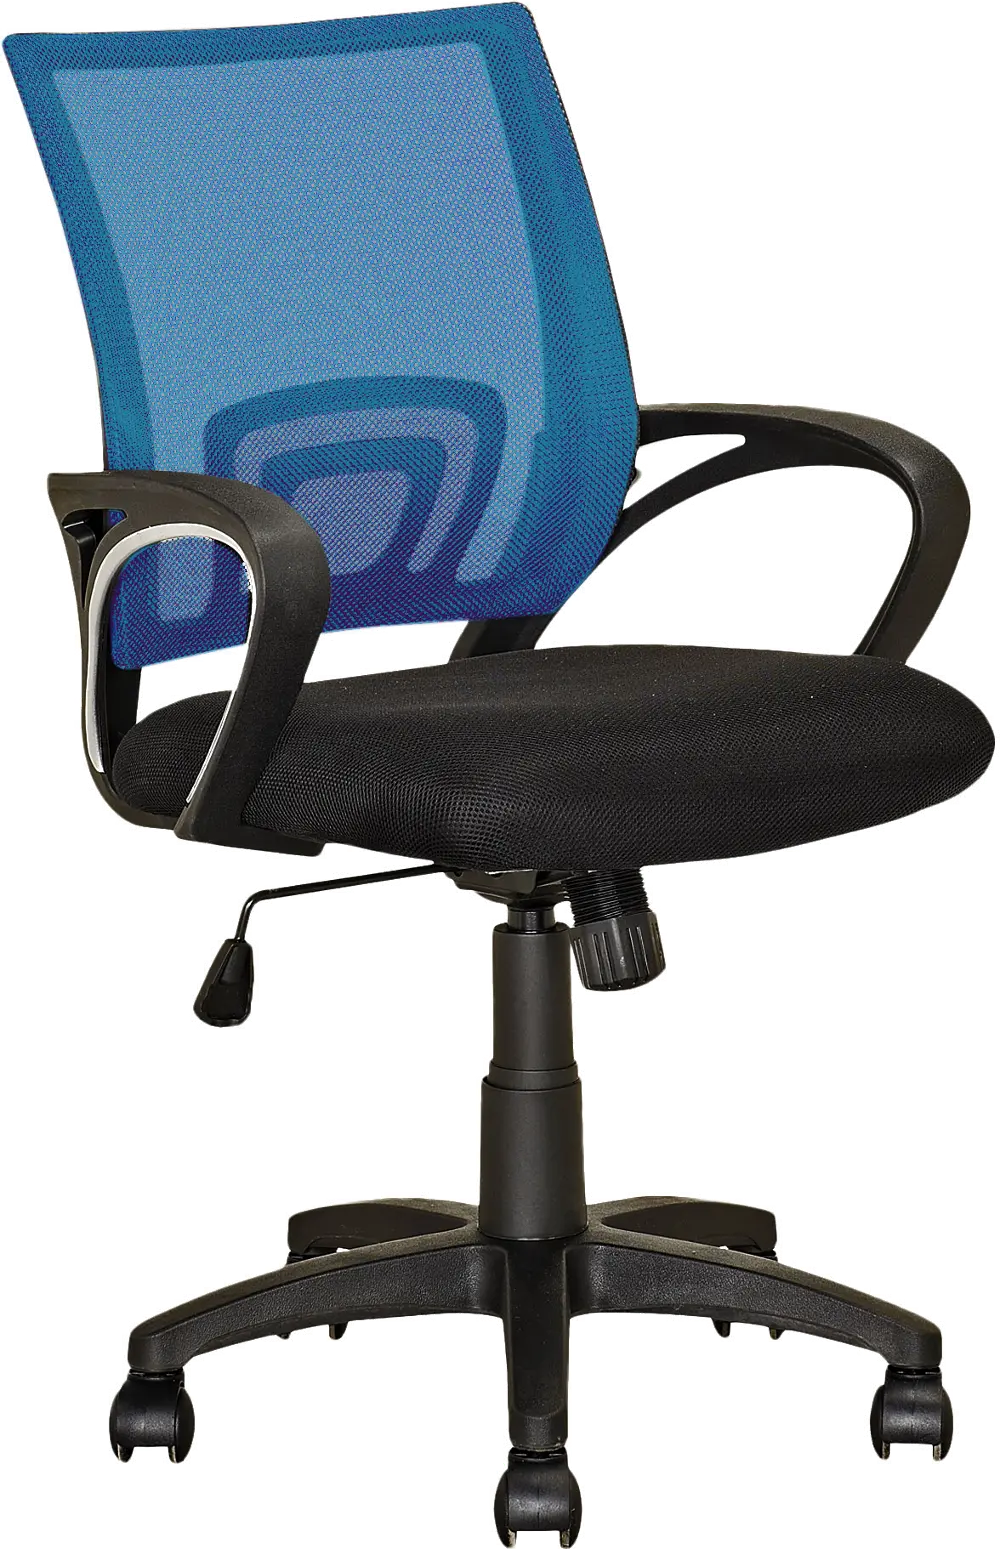 Workspace Blue and Black Mesh Office Chair-1